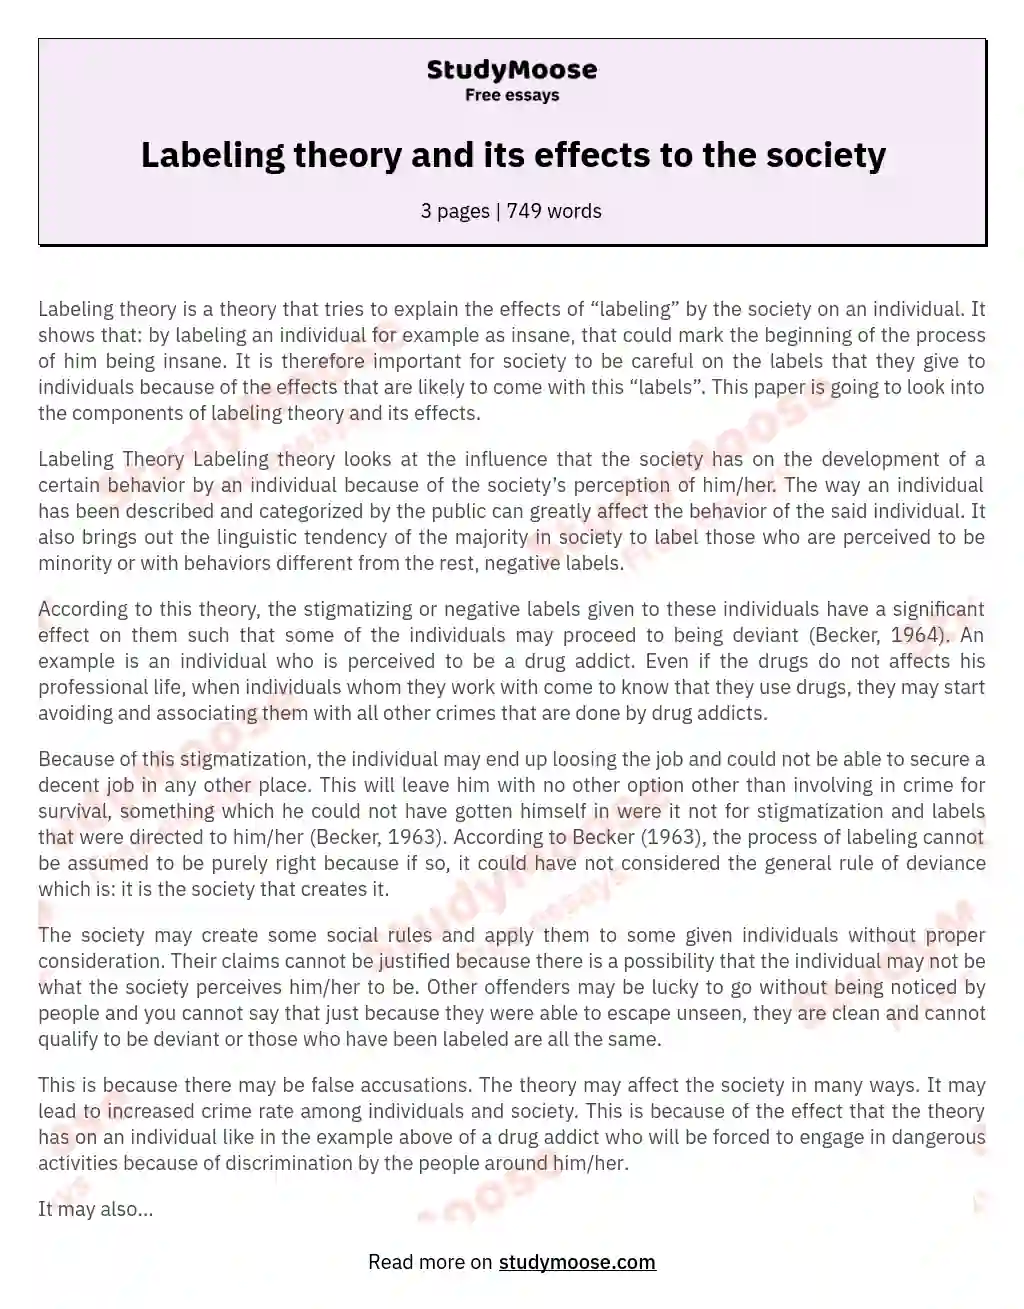 Labeling theory and its effects to the society